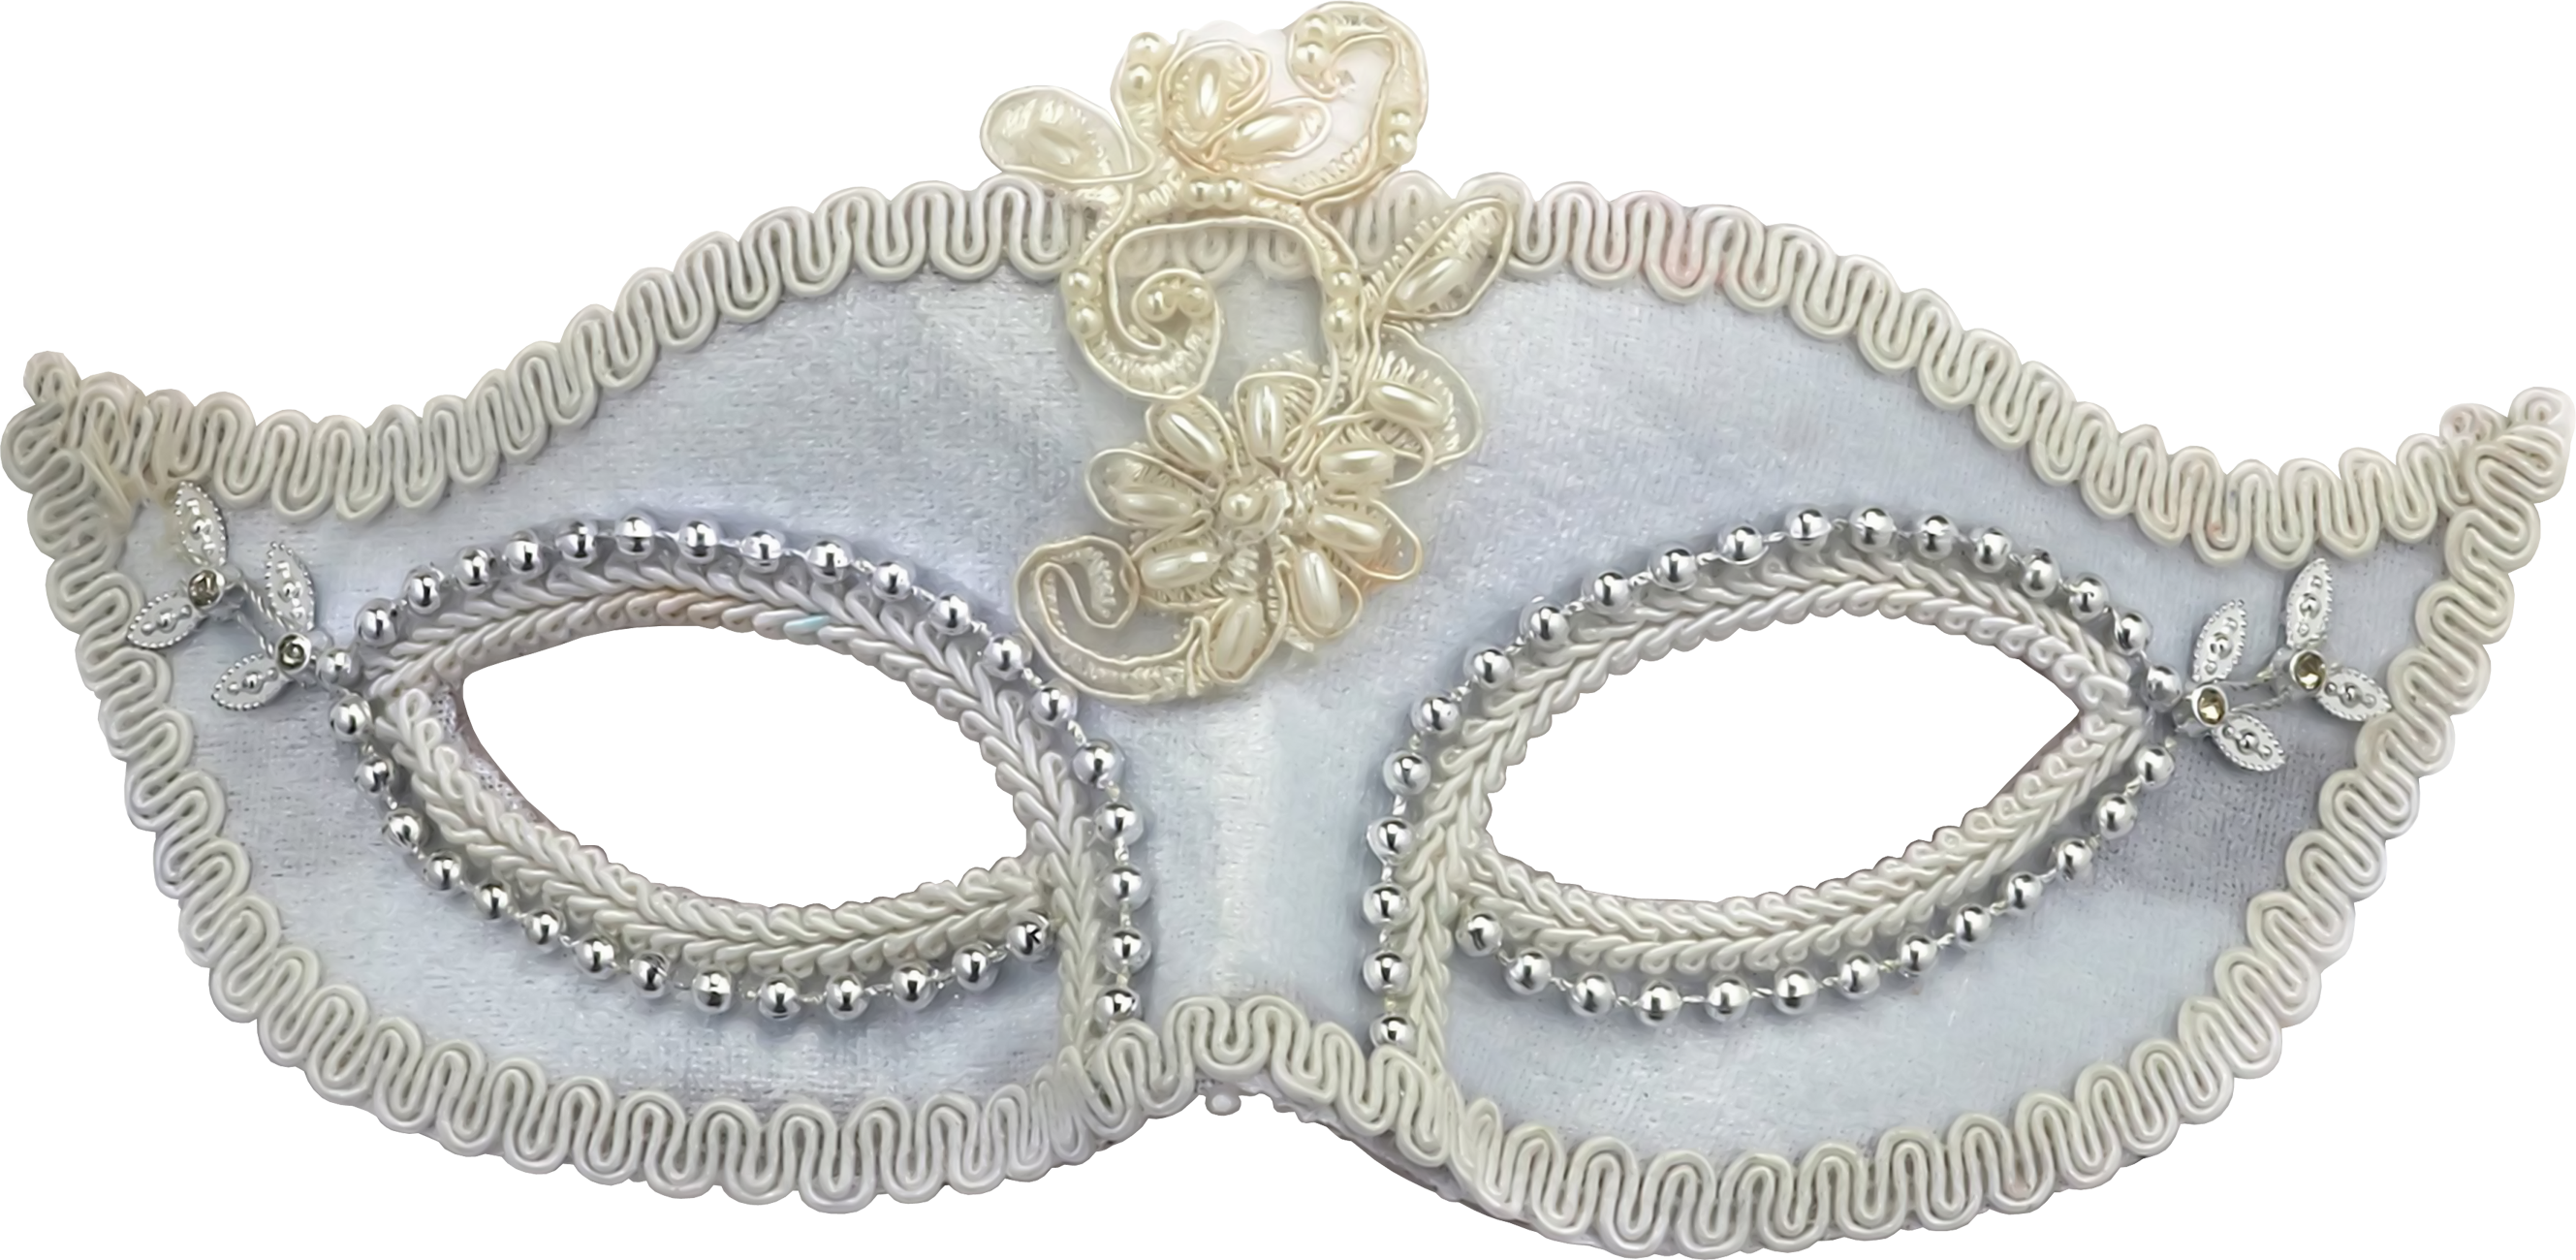 A White Mask With Beads And Pearls